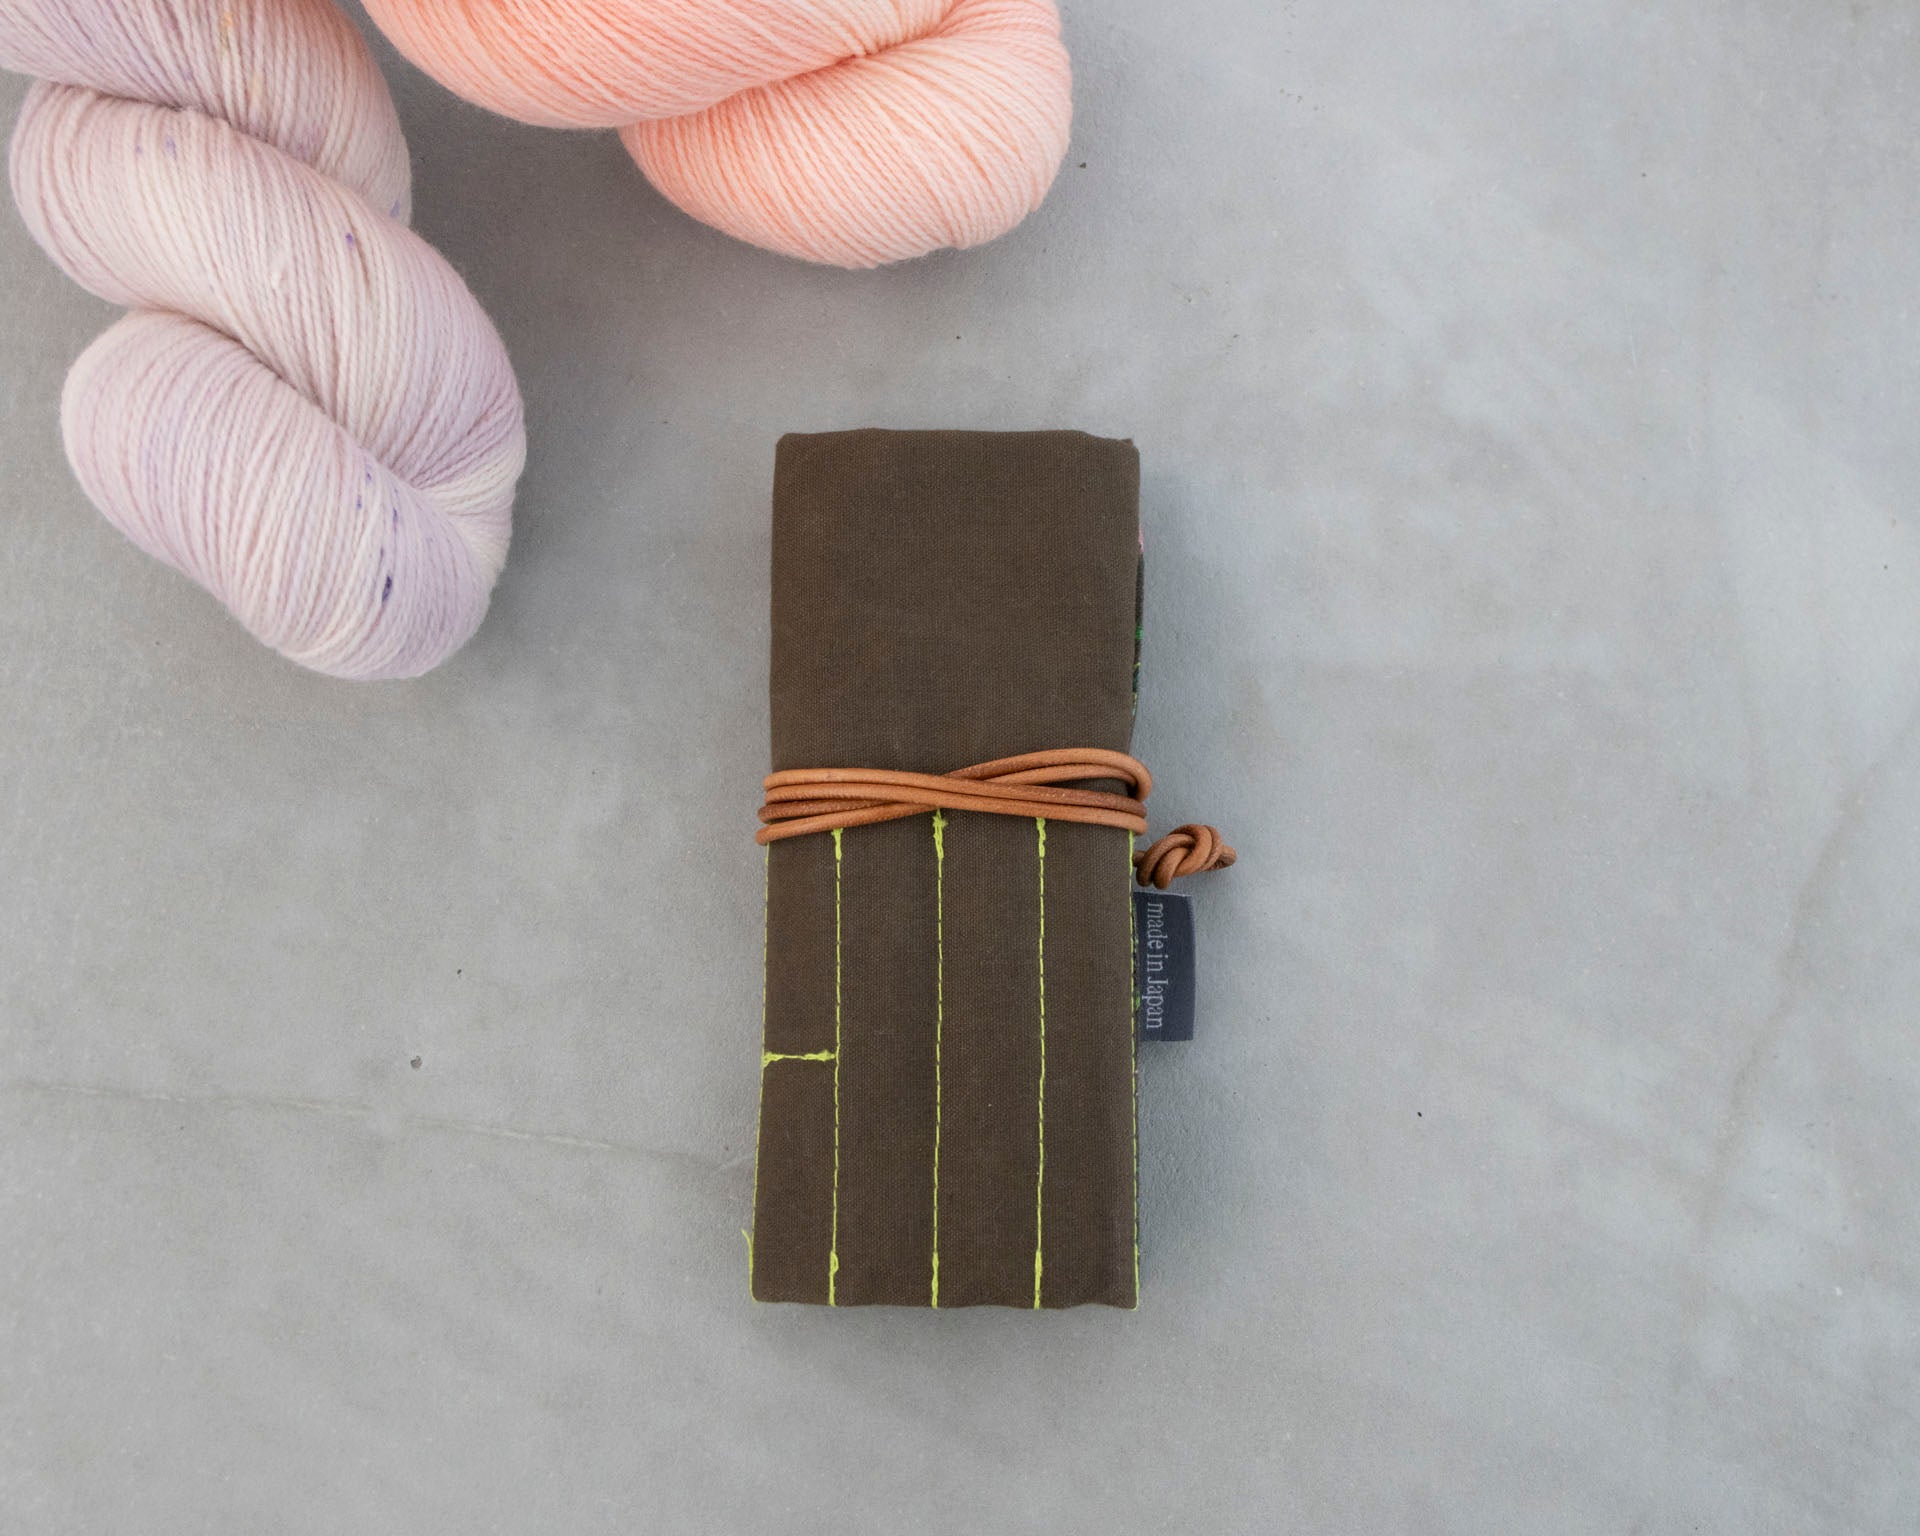 [sewing kit] 1Project Needle Case kit